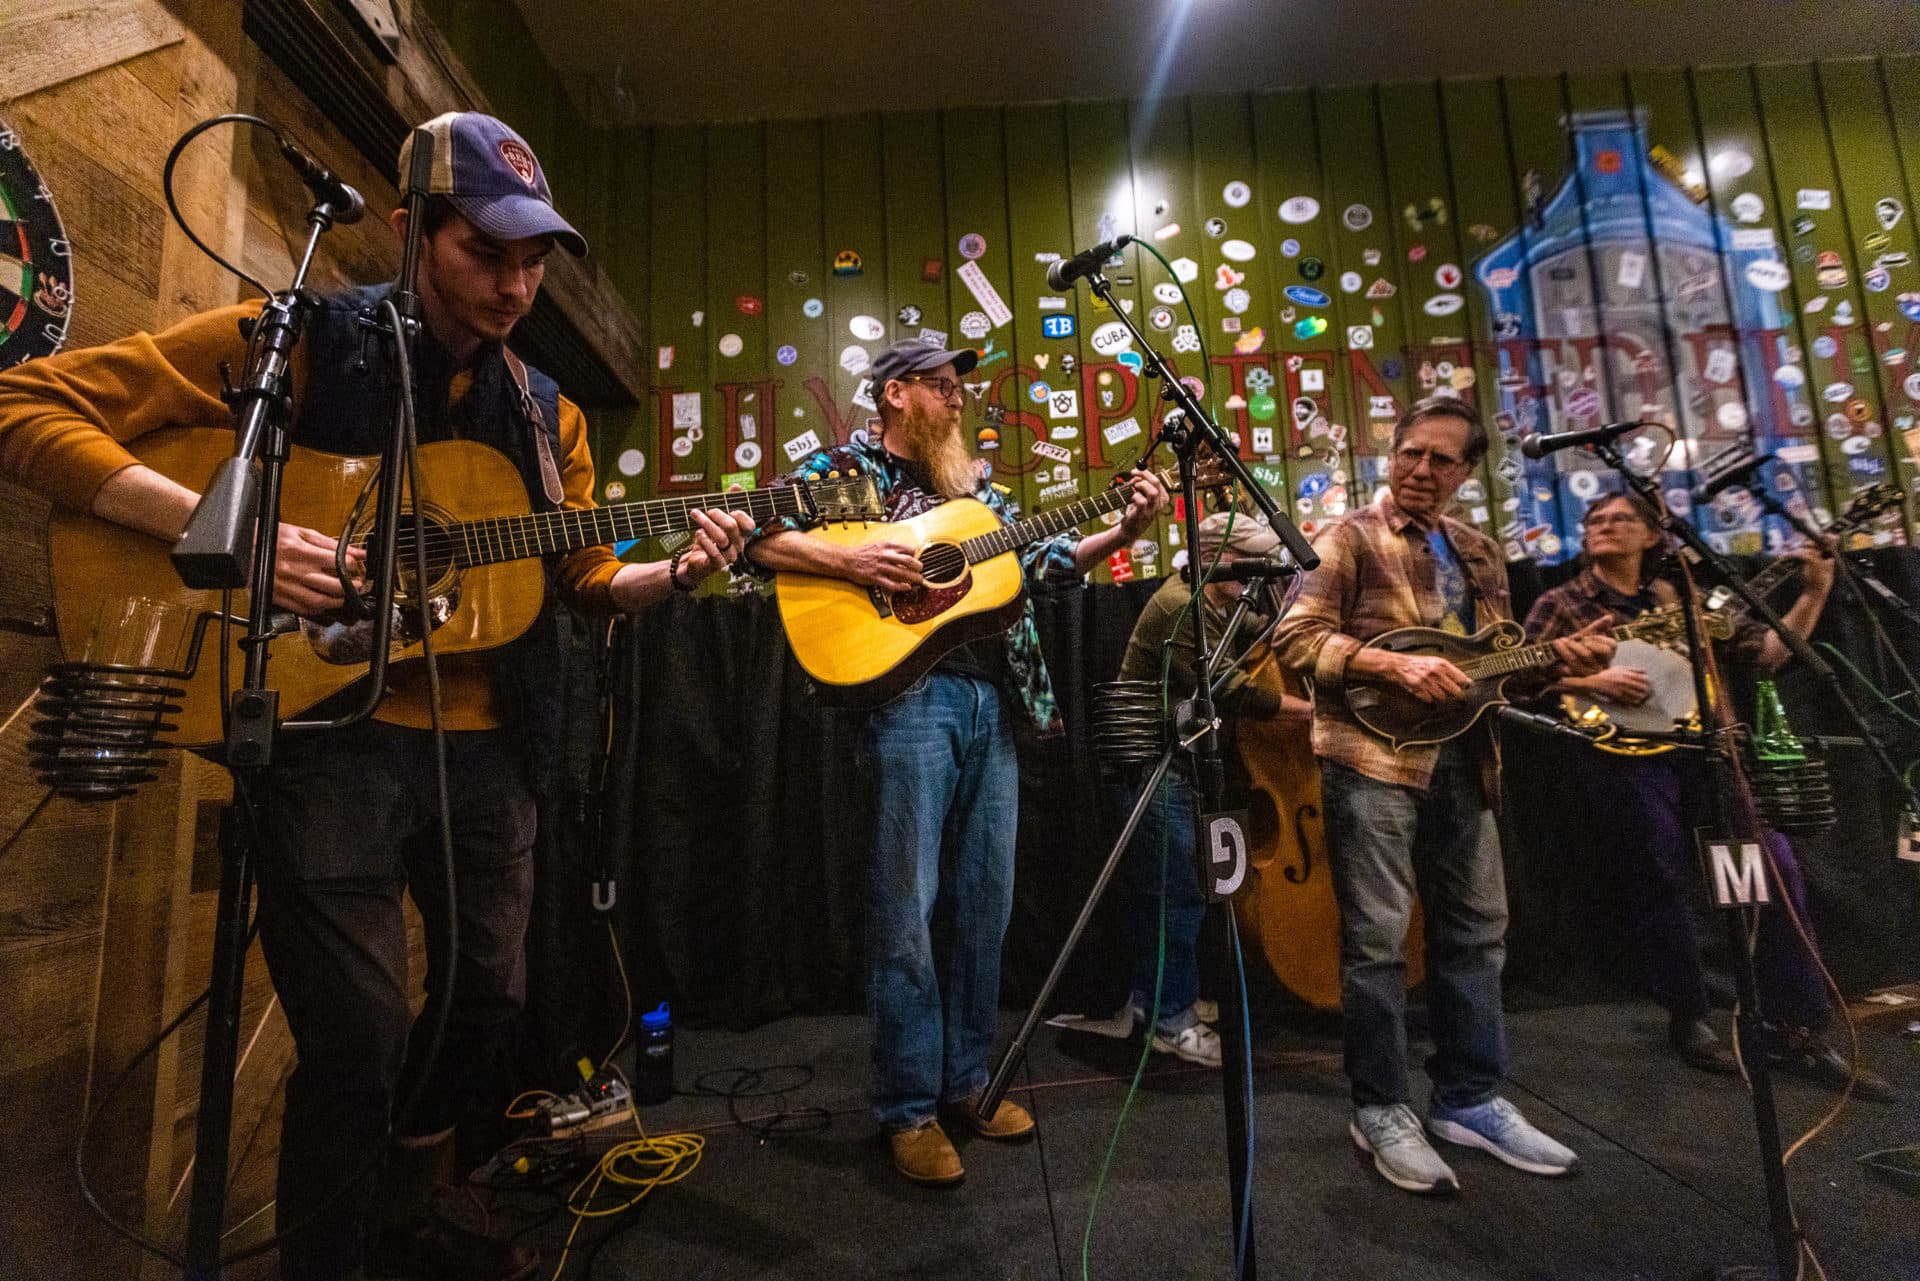 A group of musicians from the audience take the stage to do a pick-up jam session on Bluegrass Tuesday at Lily P’s. (Jesse Costa/WBUR)